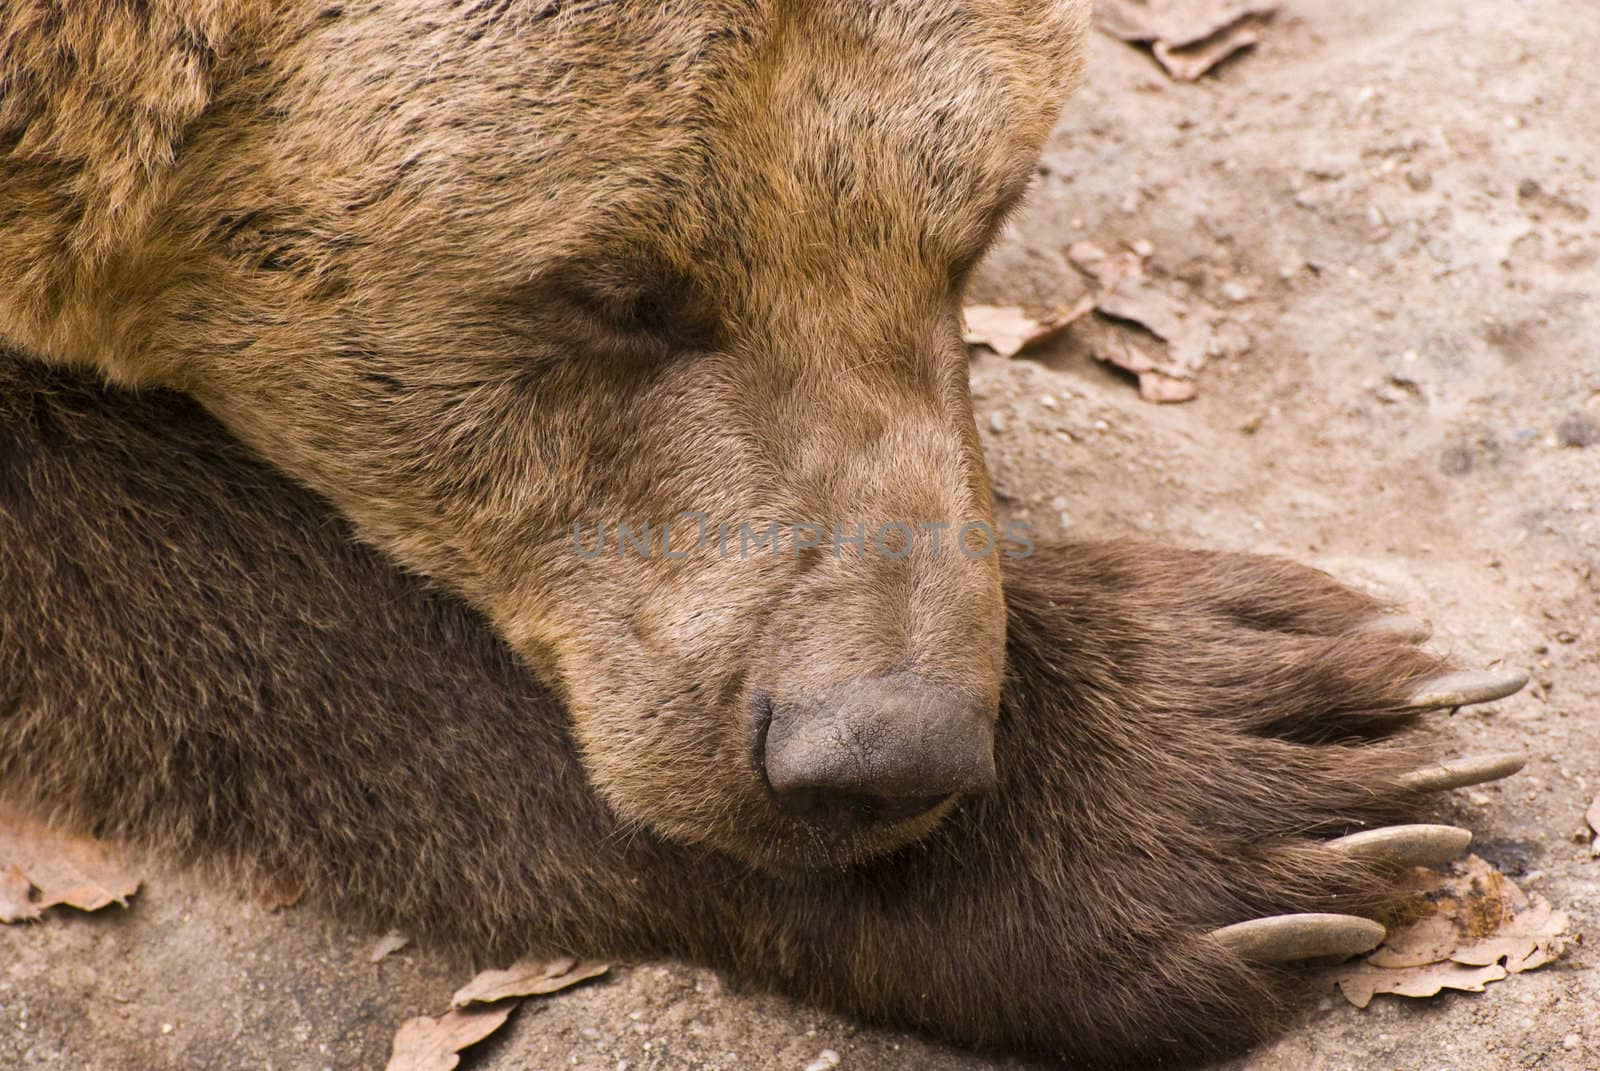 Brown bear - picture detail and mourning head (portraits) 